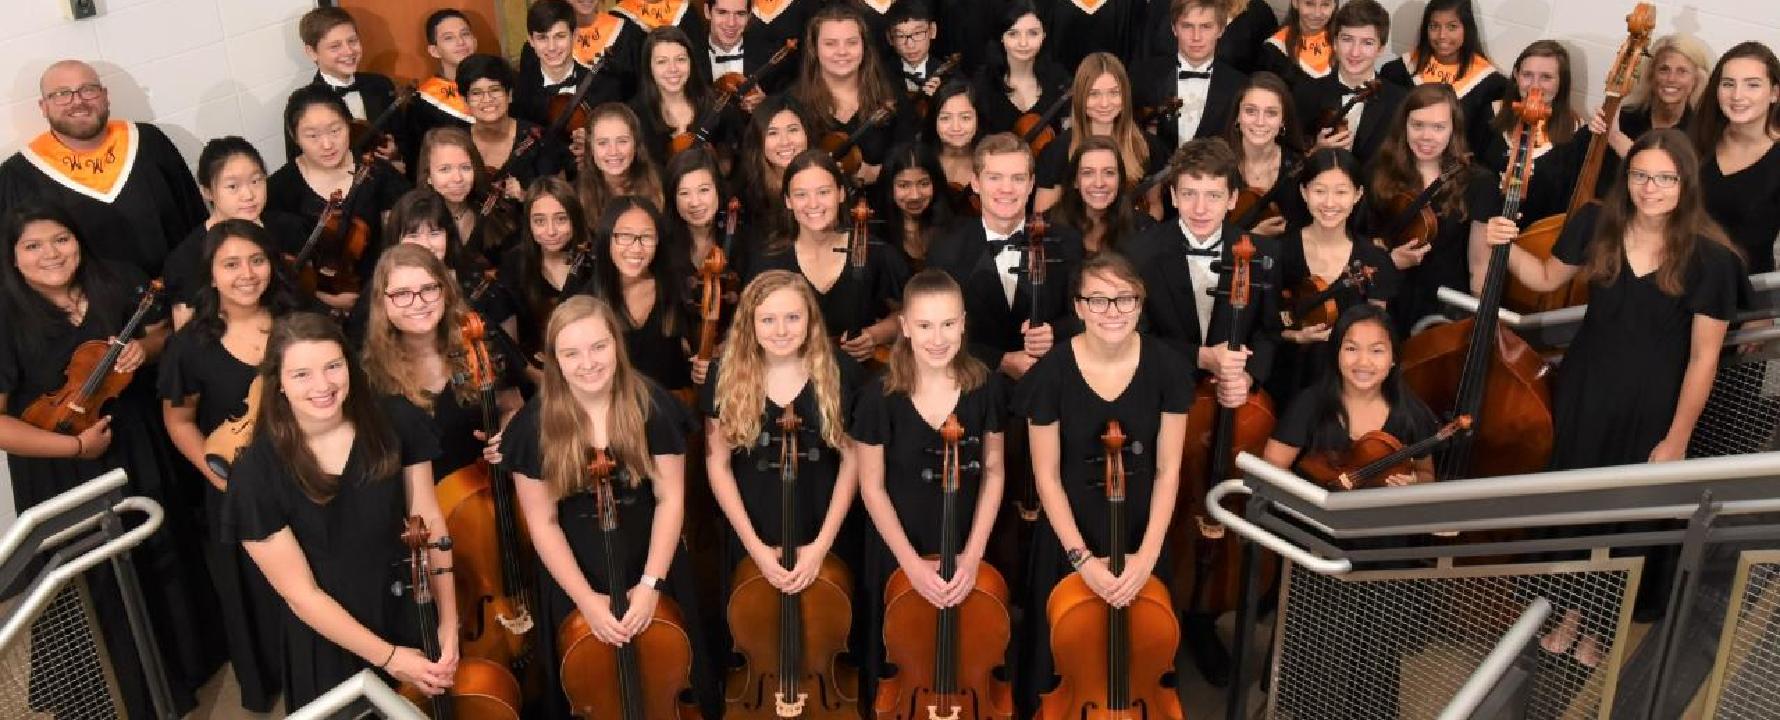 Wheaton Warrenville Symphony Orchestra Concerts in TOOWOOMBA 2023 2024